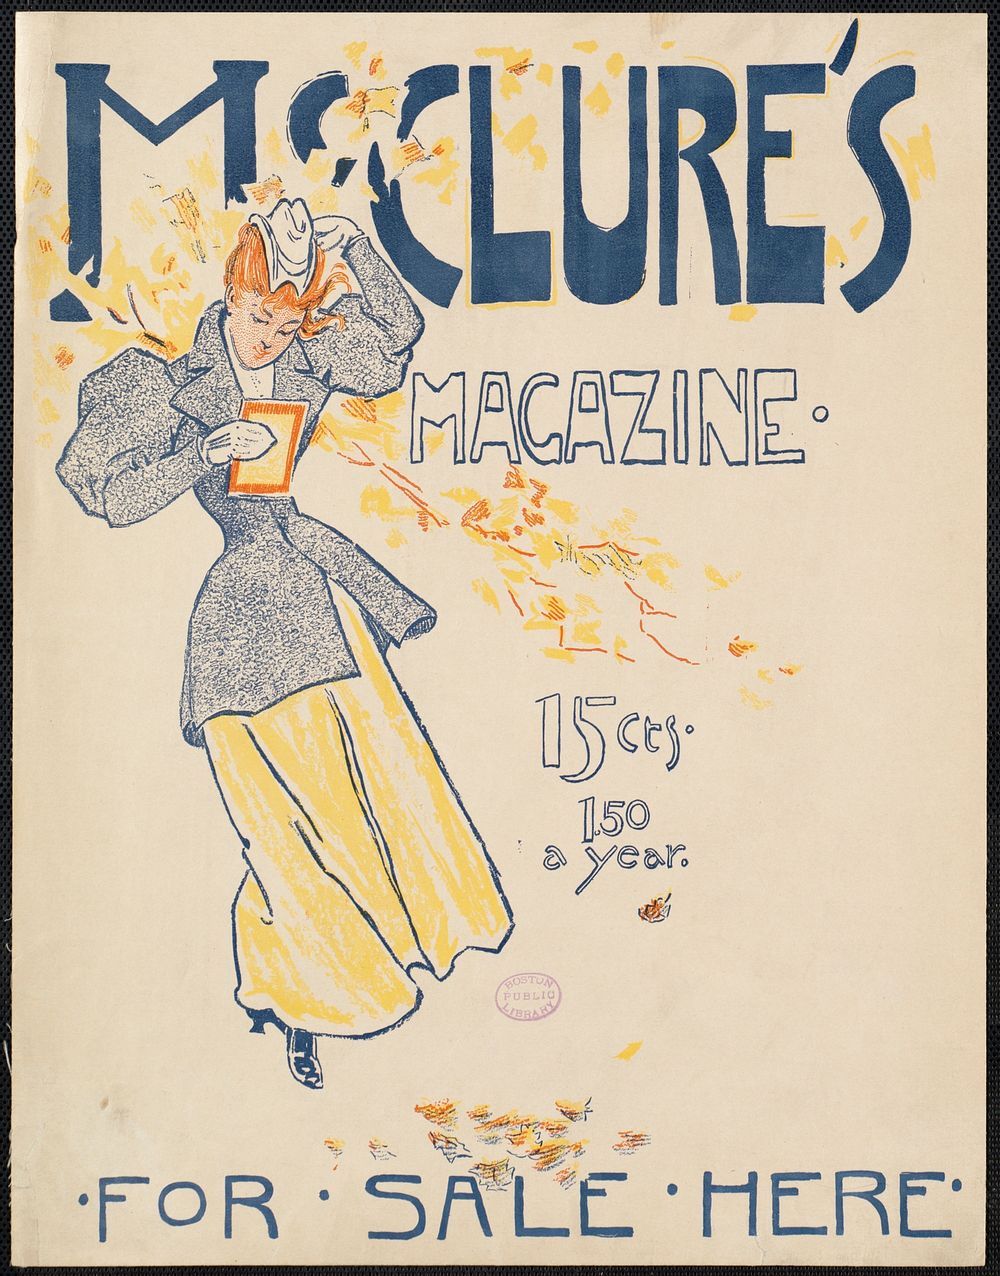             McClure's magazine for sale here          